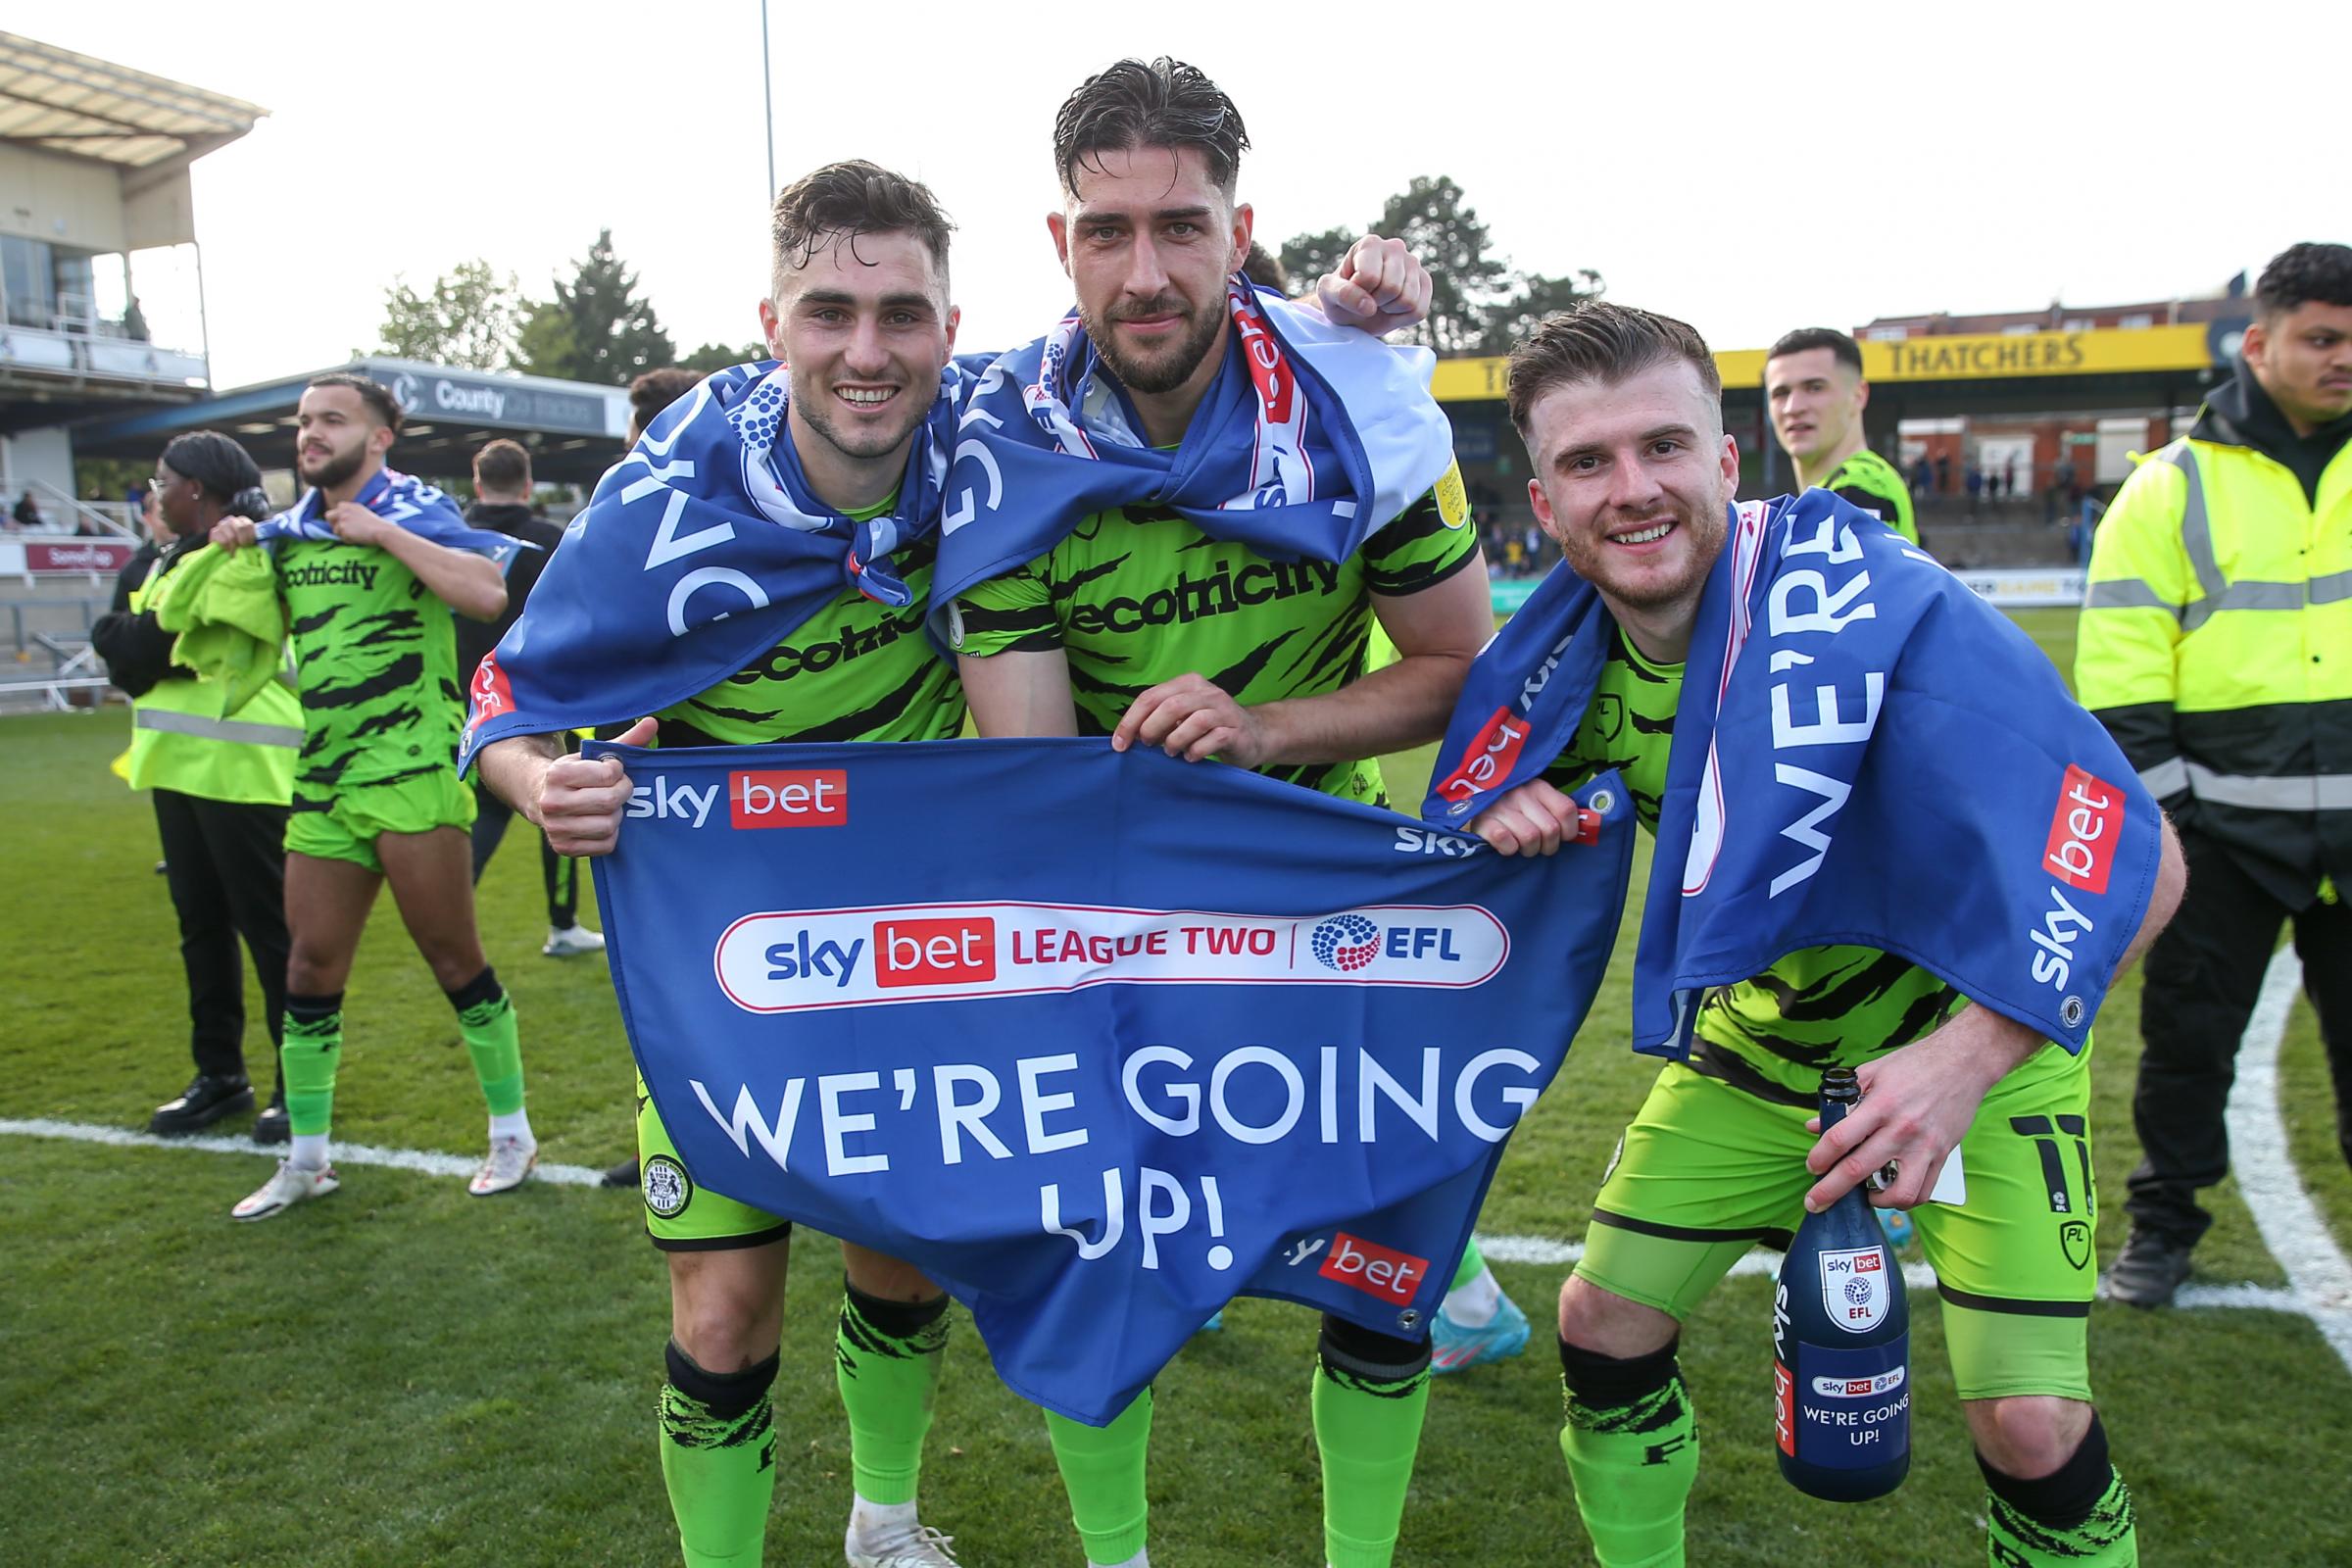 Forest Green Rovers Jordan Moore-Taylor(15), Forest Green Rovers Daniel Sweeney(4) and Forest Green Rovers Nicky Cadden(11) during the EFL Sky Bet League 2 match between Bristol Rovers and Forest Green Rovers at the Memorial Stadium, Bristol, England on